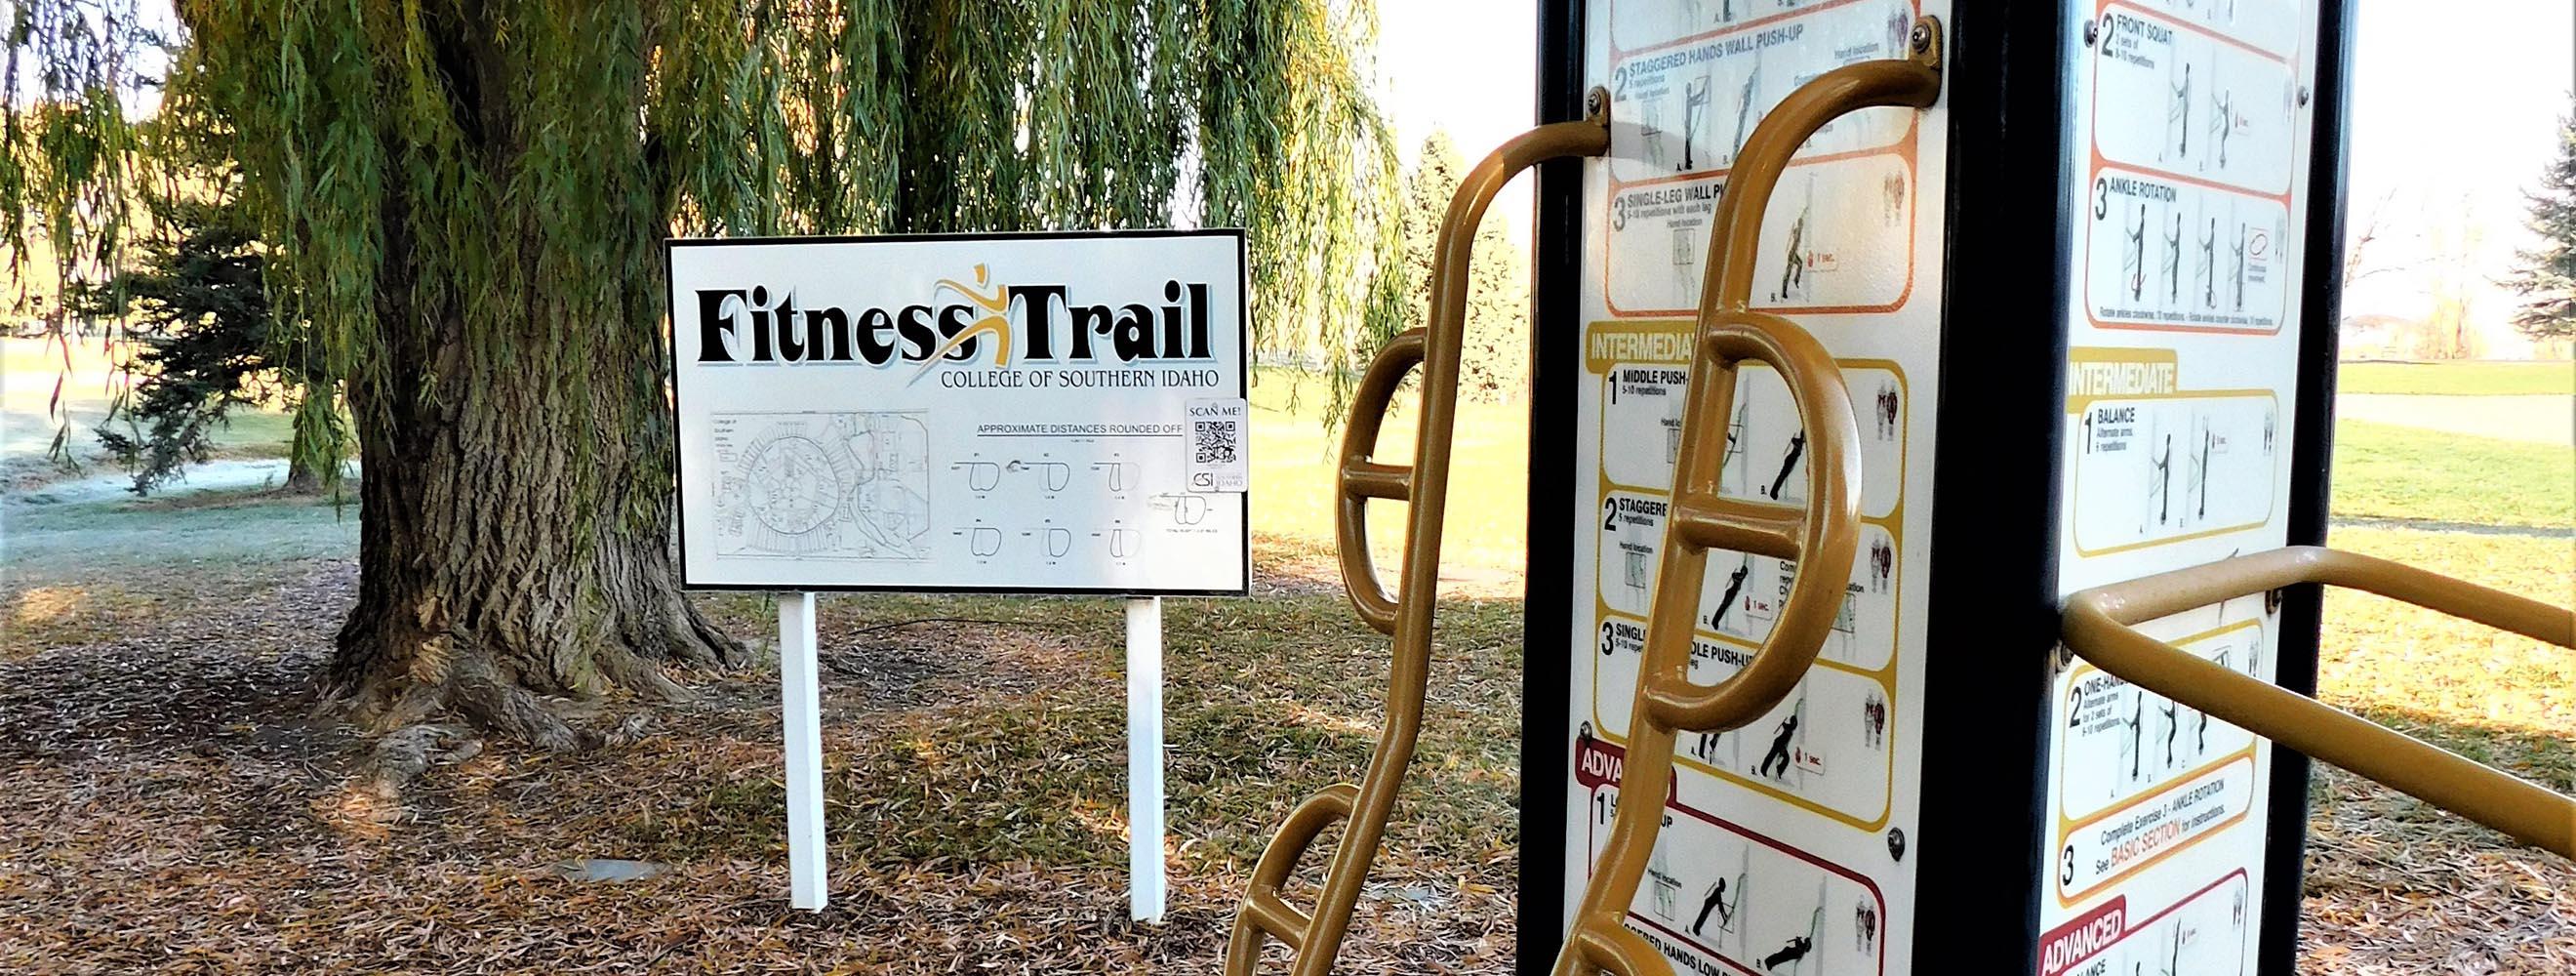 Fitness Trail Sign with map of entire trail